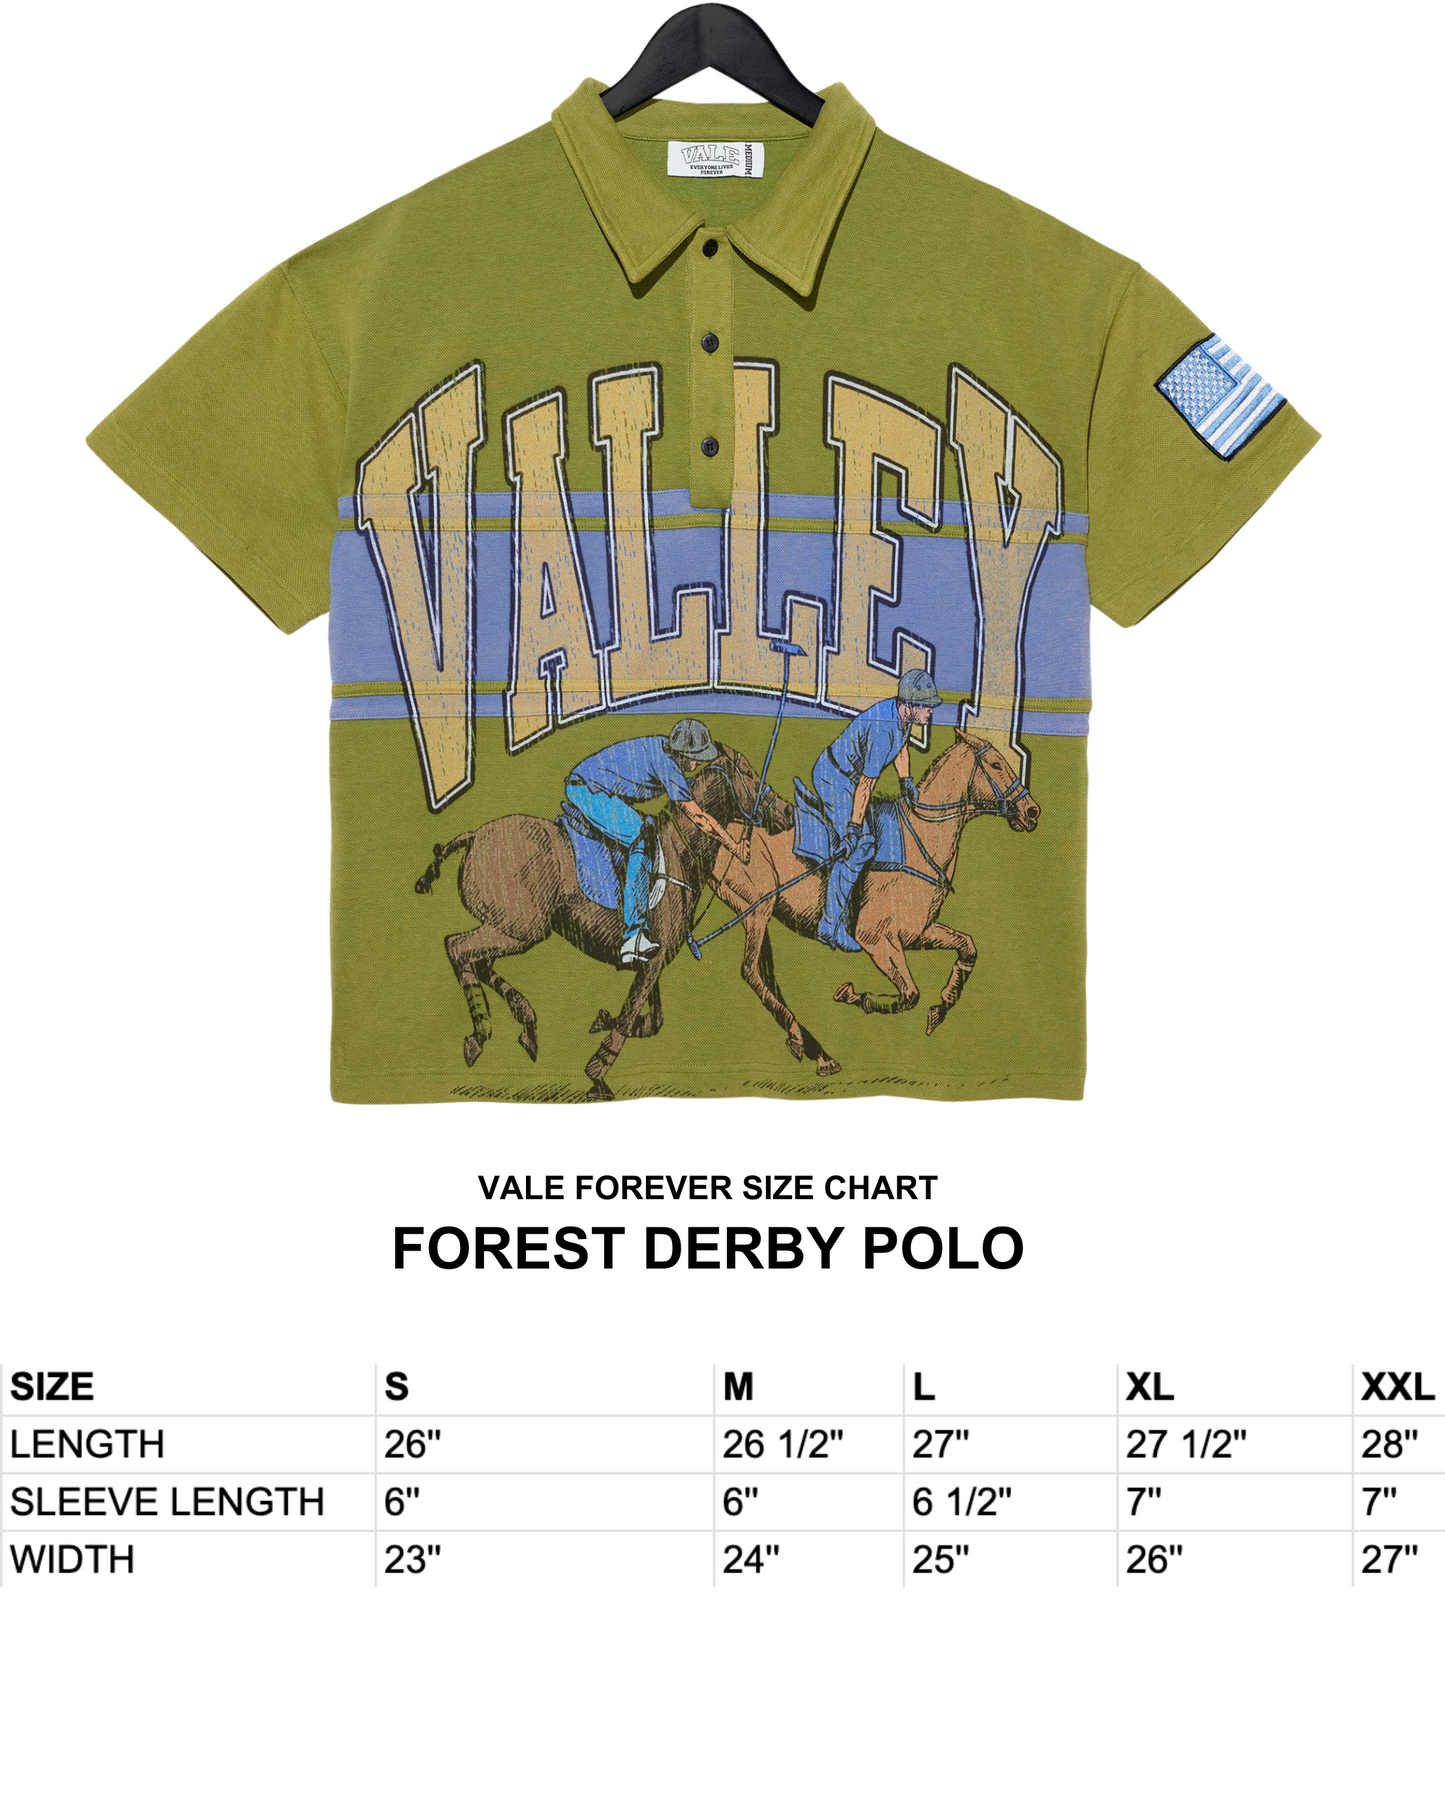 FOREST DERBY POLO